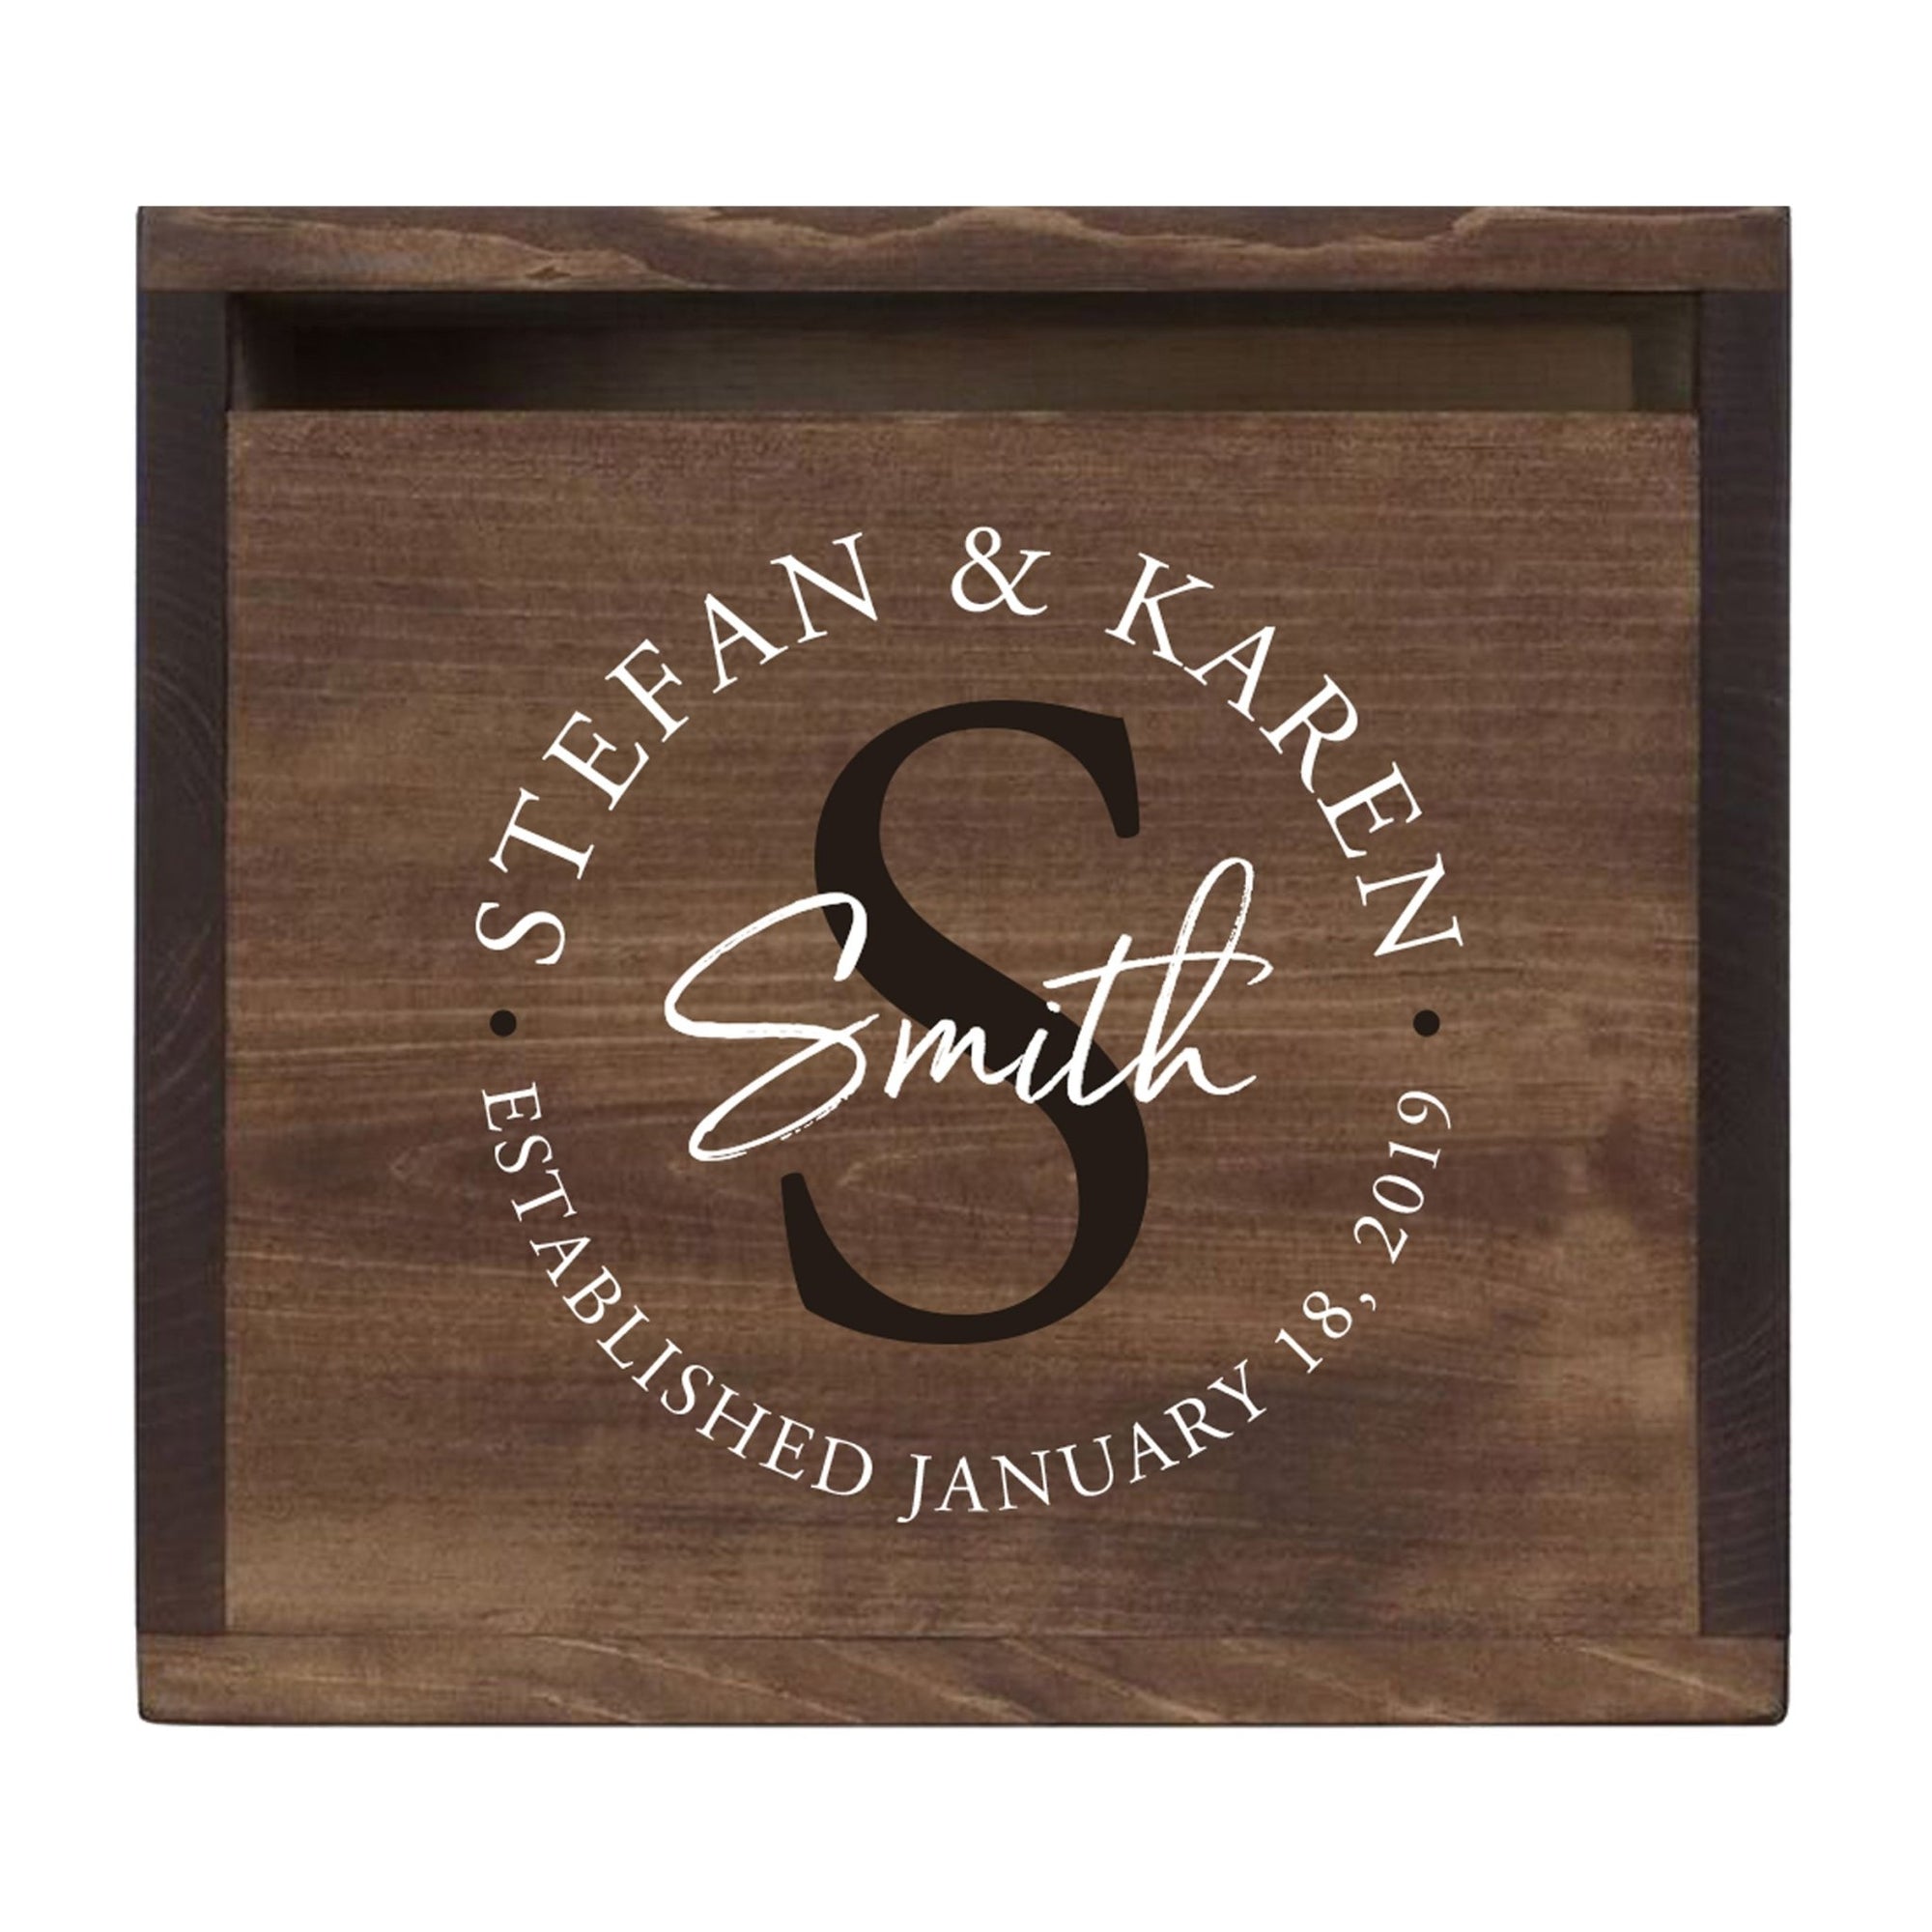 Personalized Wooden Card Box for Wedding Ceremonies, Venues, Receptions, Bridal Showers, and Engagement Parties 13.5x12 - Stefan & Karen (S) - LifeSong Milestones